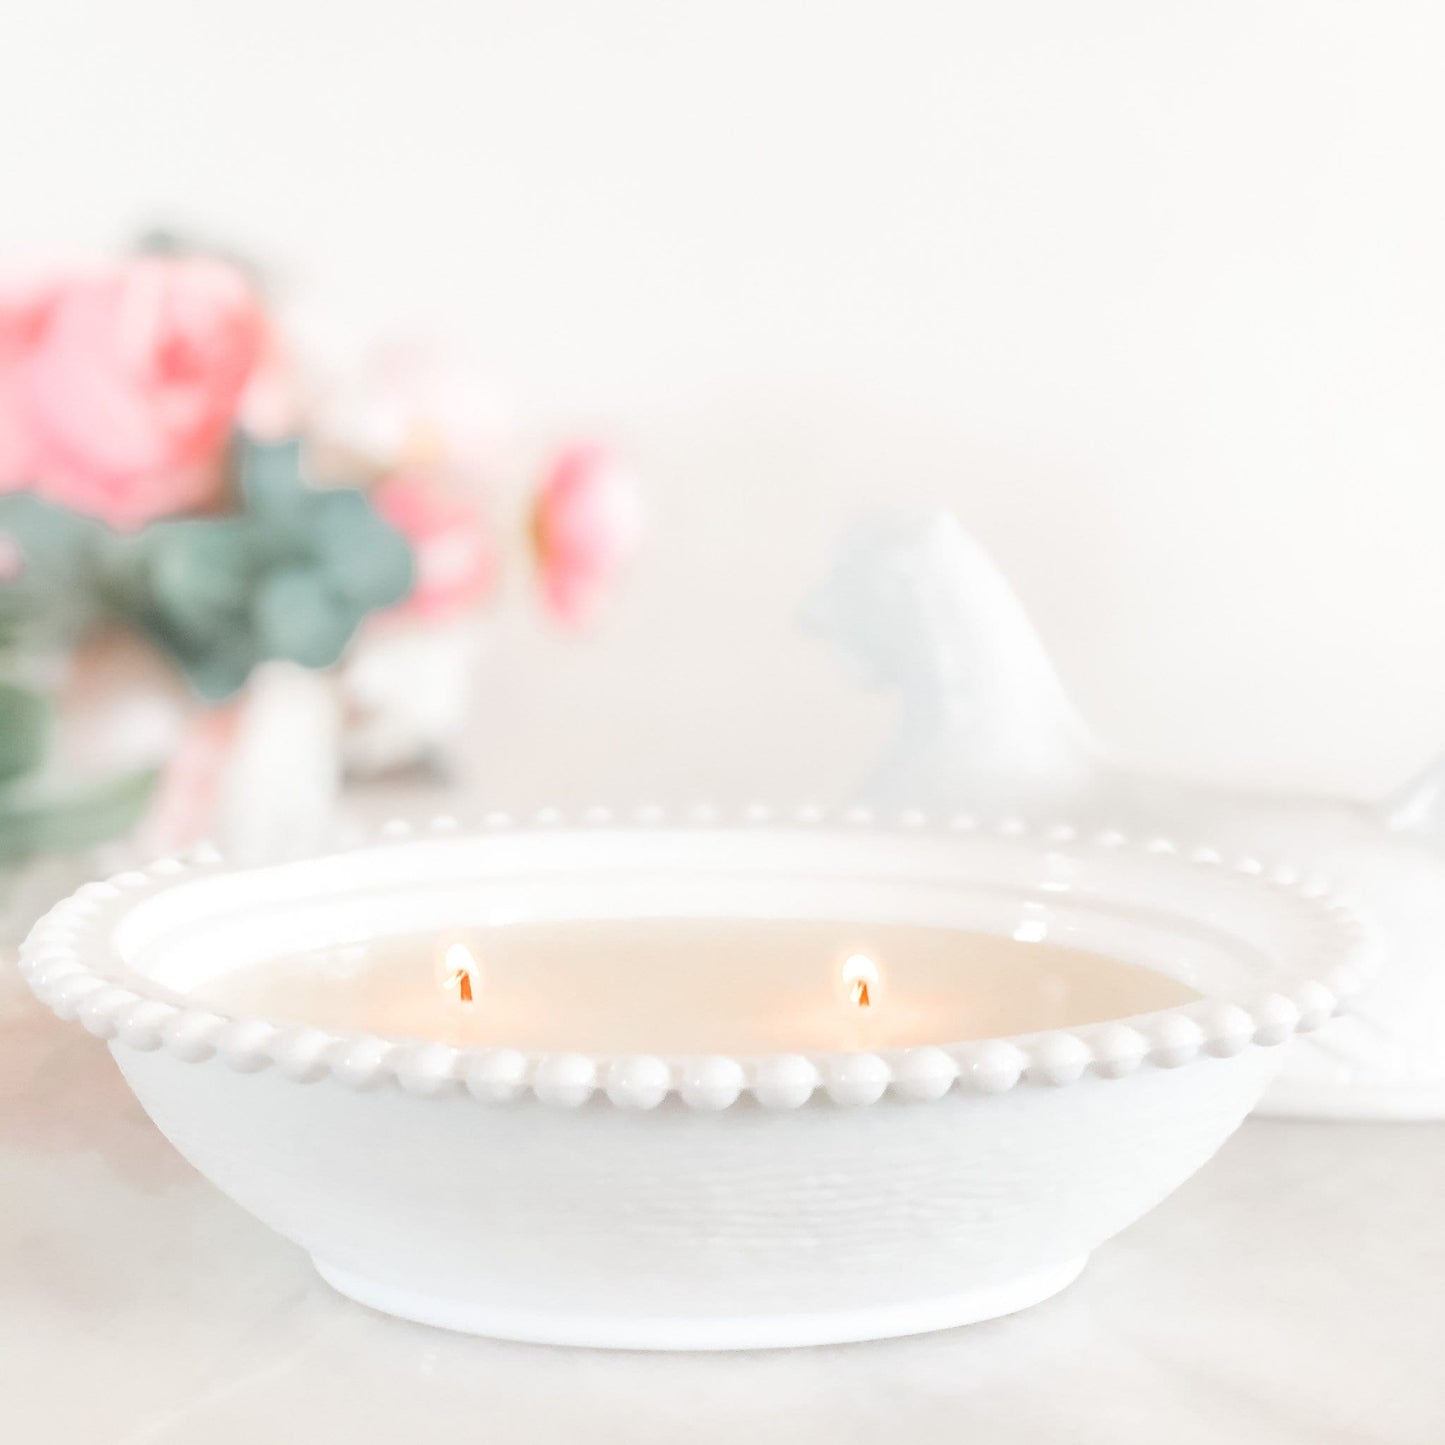 Rosemary Sage Soy Candle in Vintage Milk Glass Dish